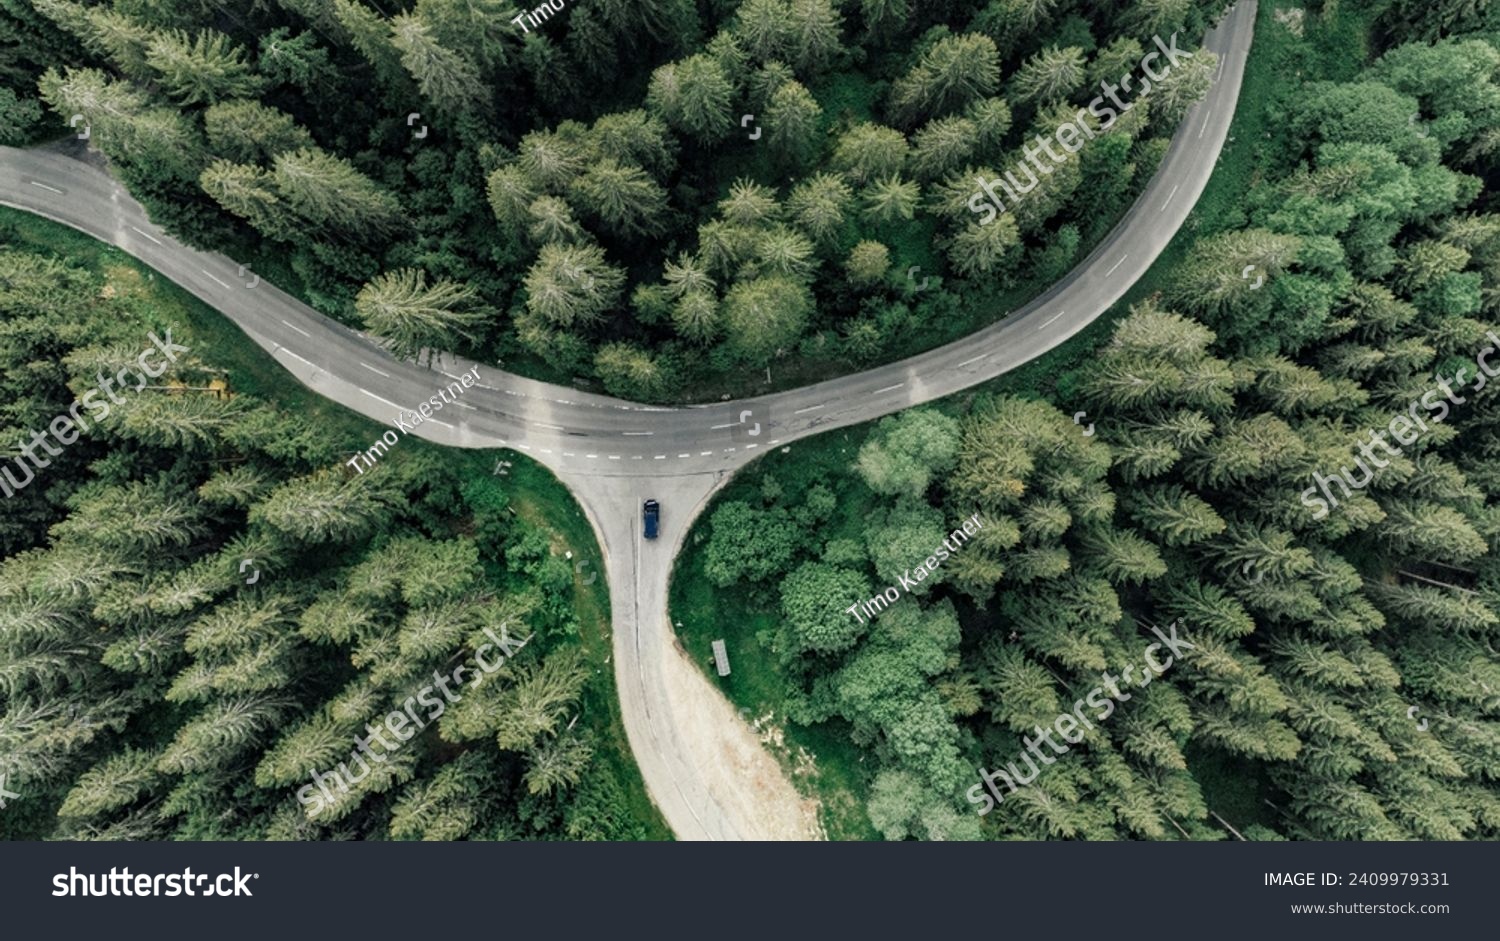 Birds eye view onto a car stopping at a crossing on a curvy road through the forest #2409979331